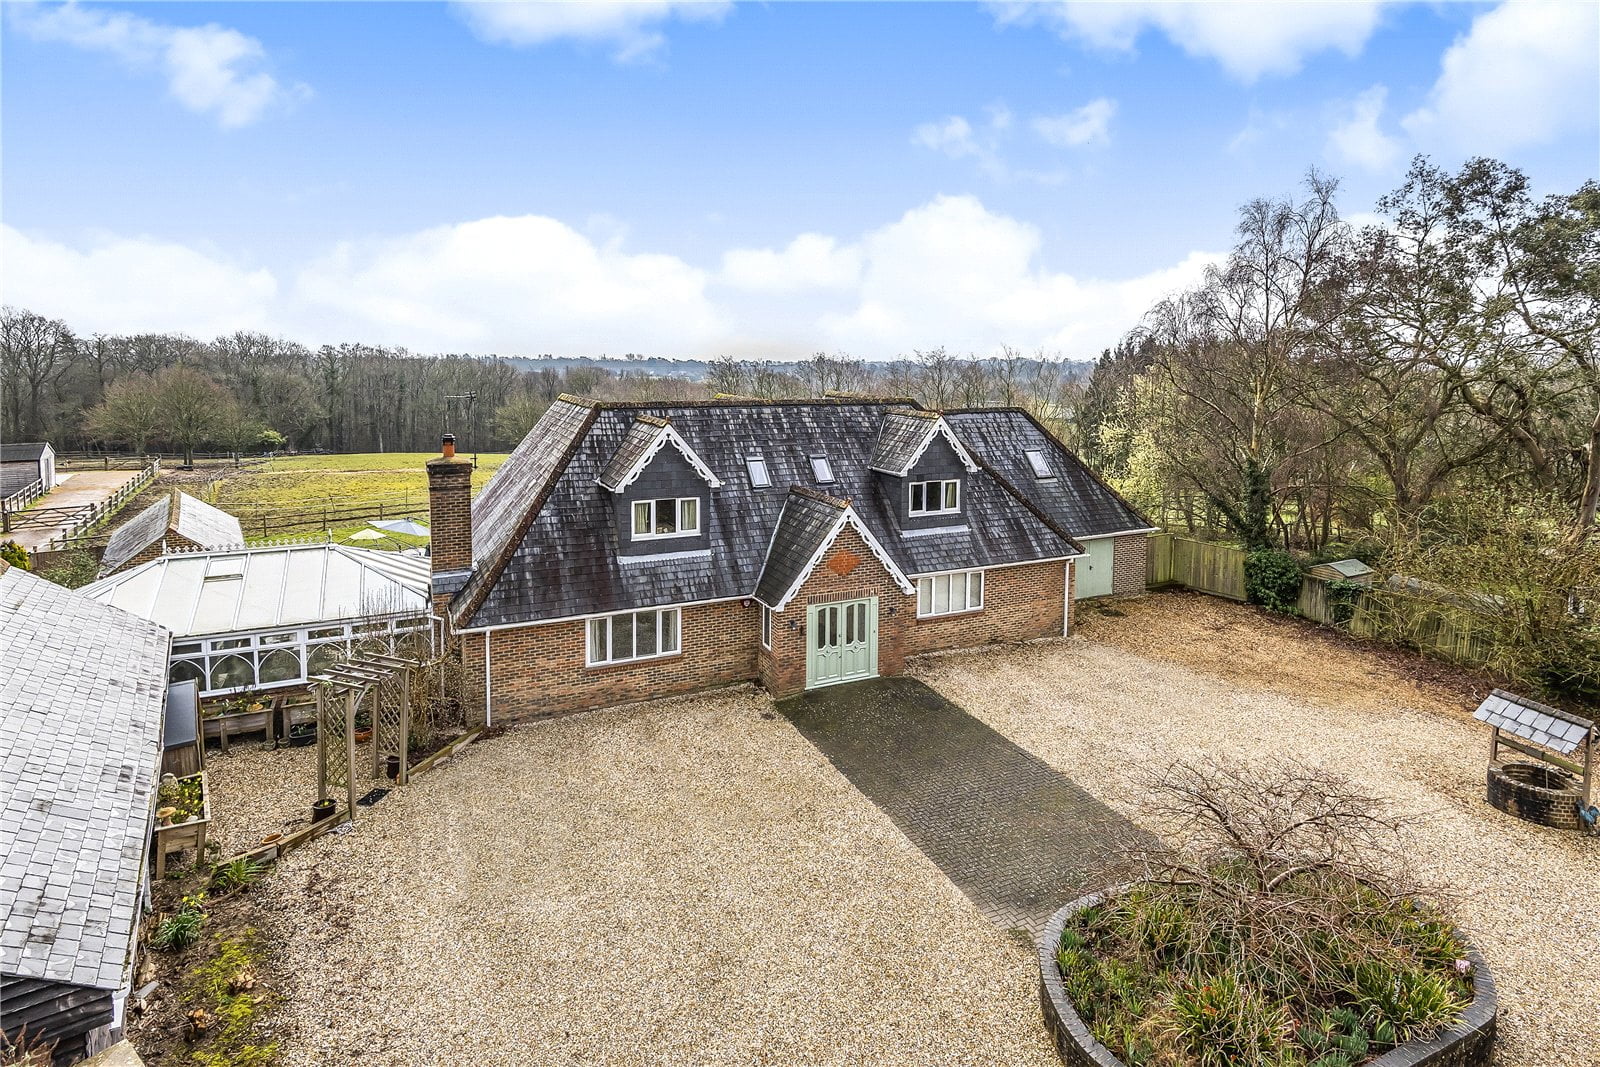 East Grinstead Road, North Chailey, Lewes, East Sussex | residential-sales